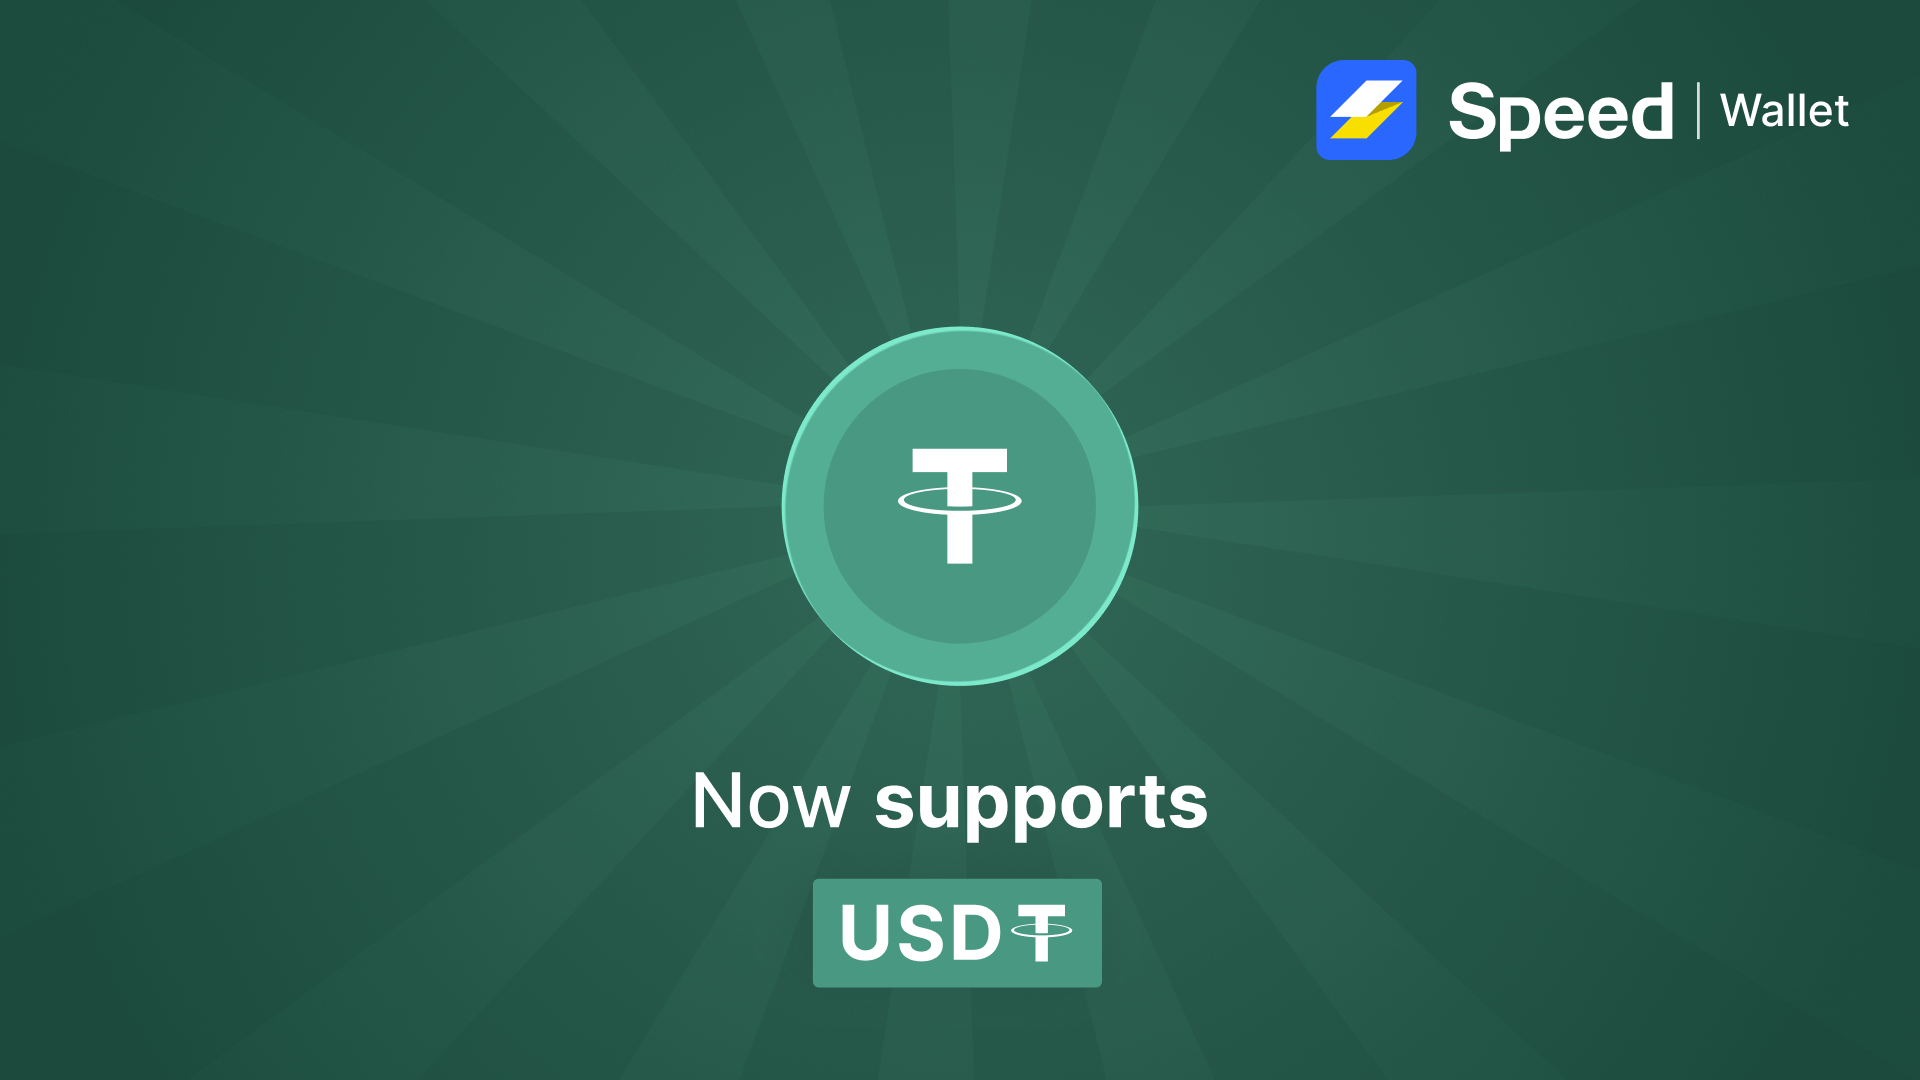 Speed Wallet Now Supports USDt Transactions